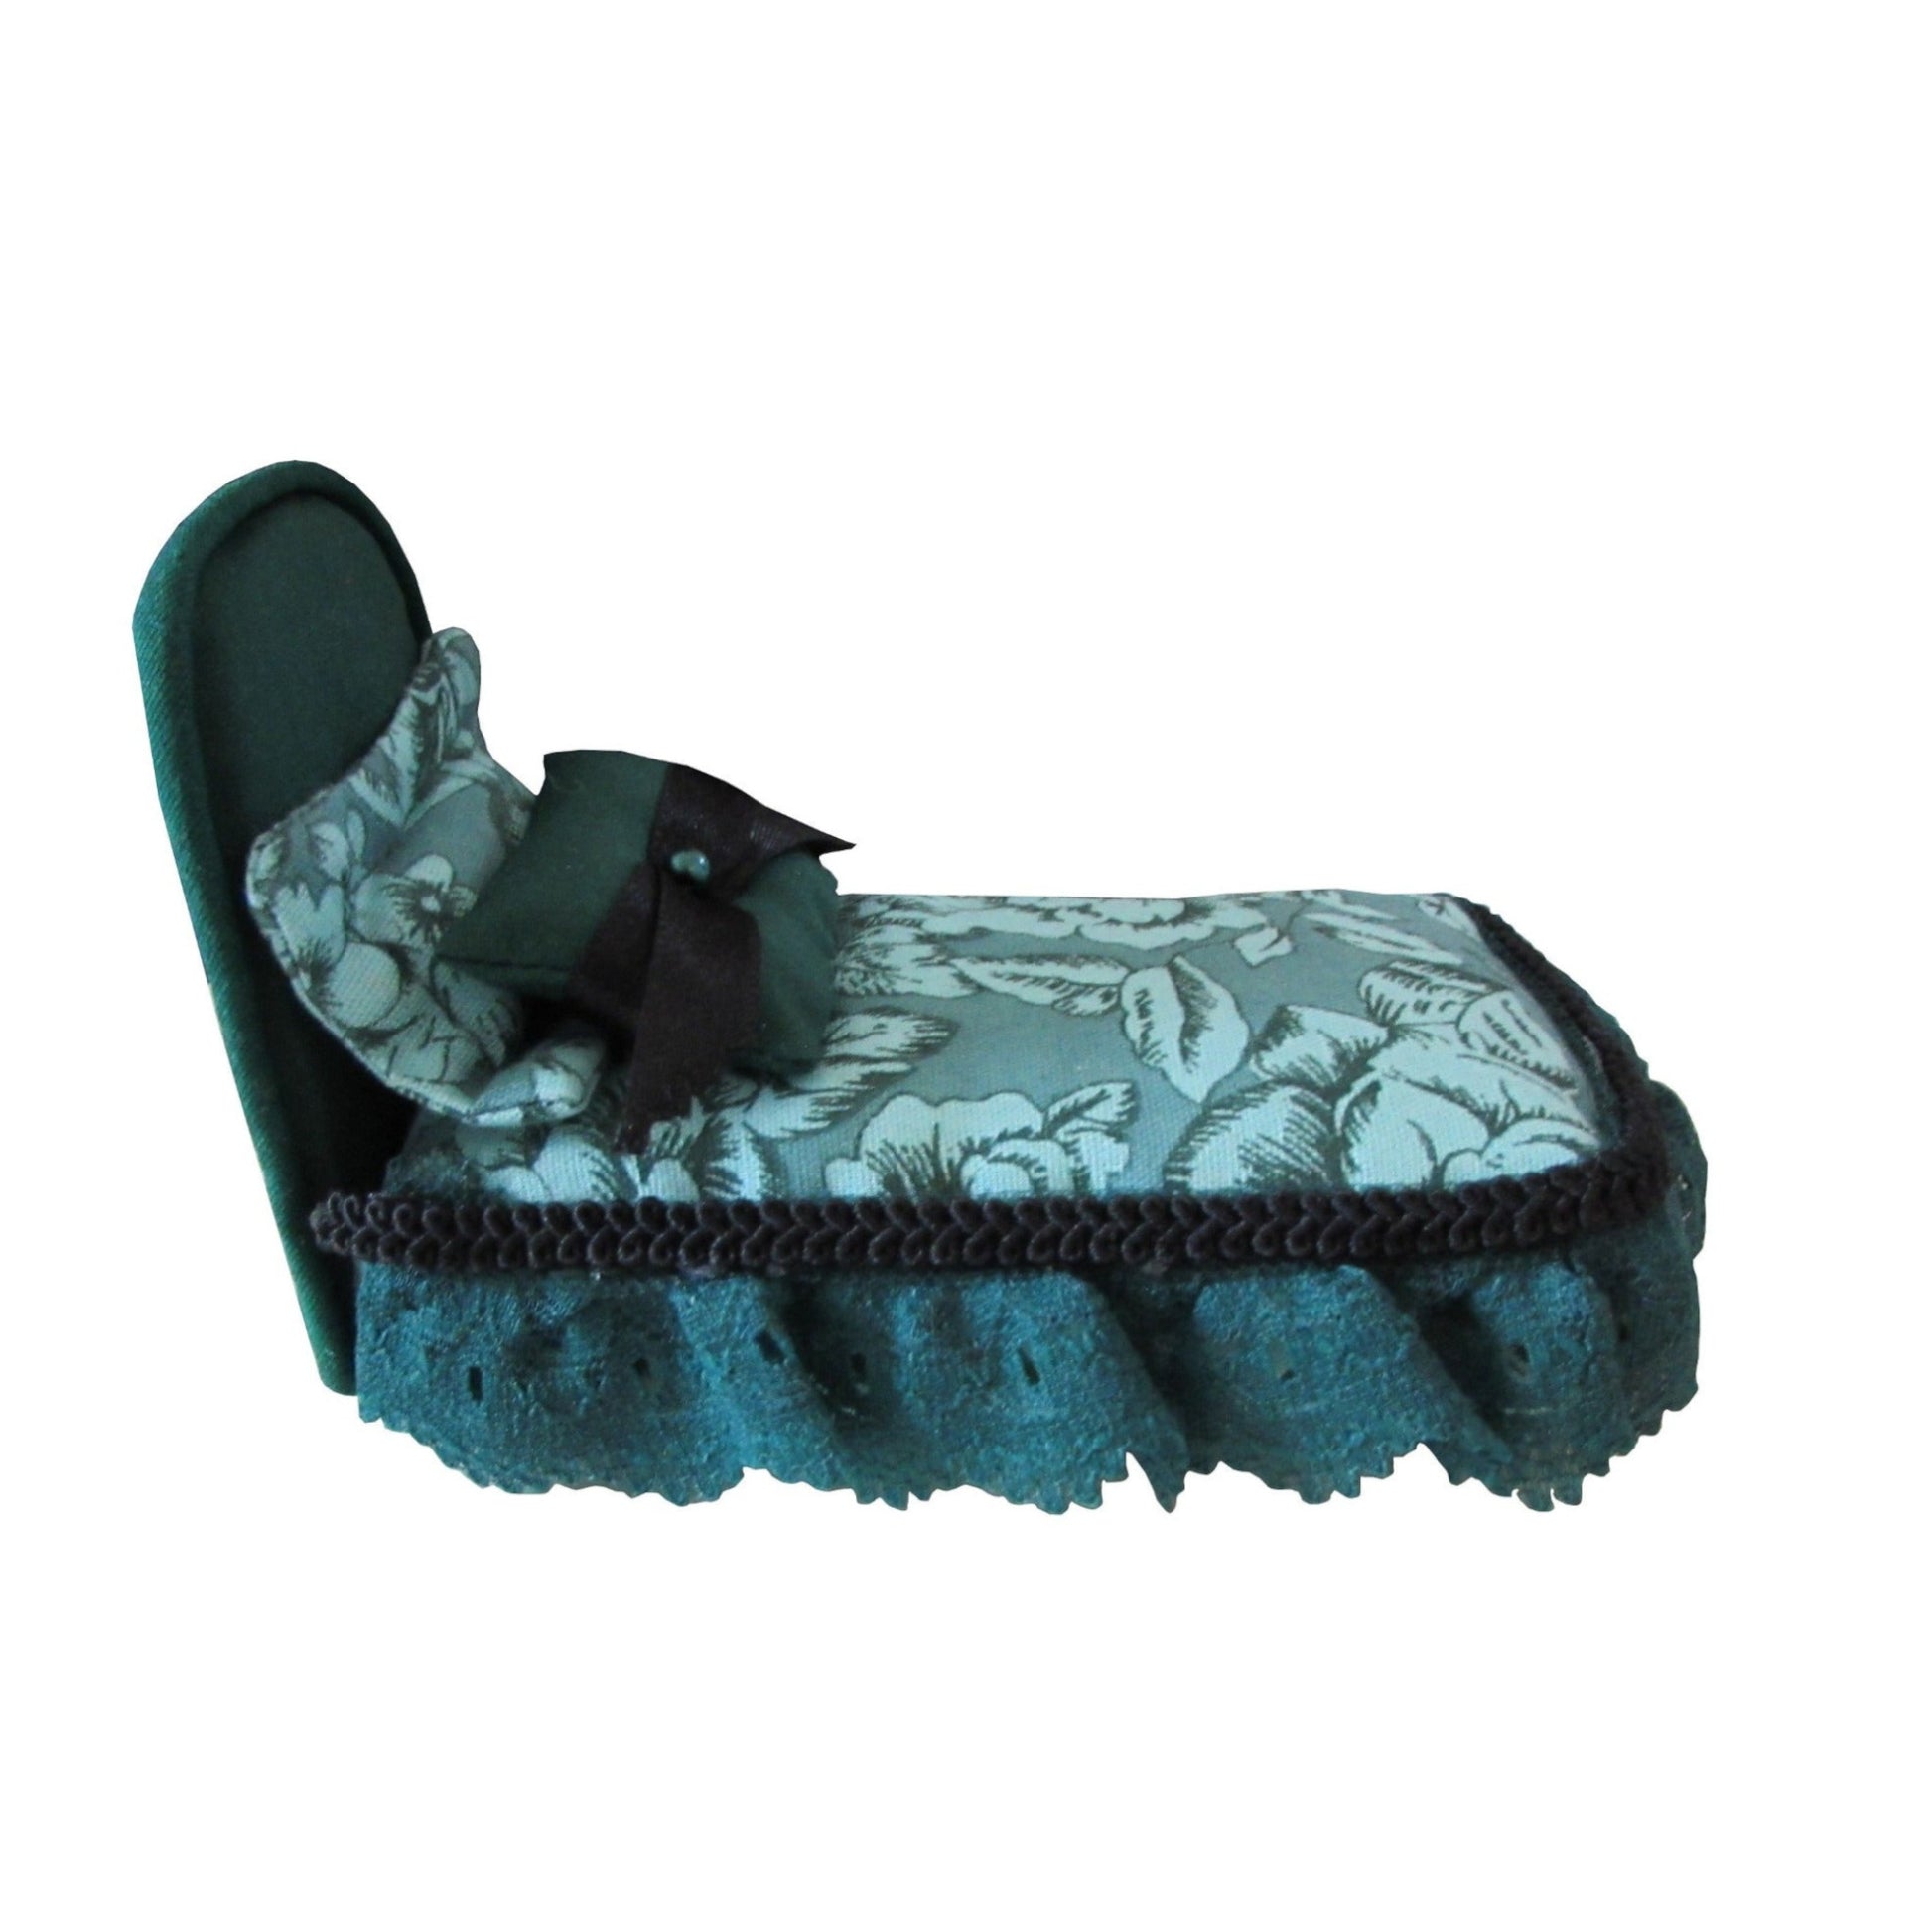 Green Pincushion Bed with Lace-Trimmed Floral Bedding Side view